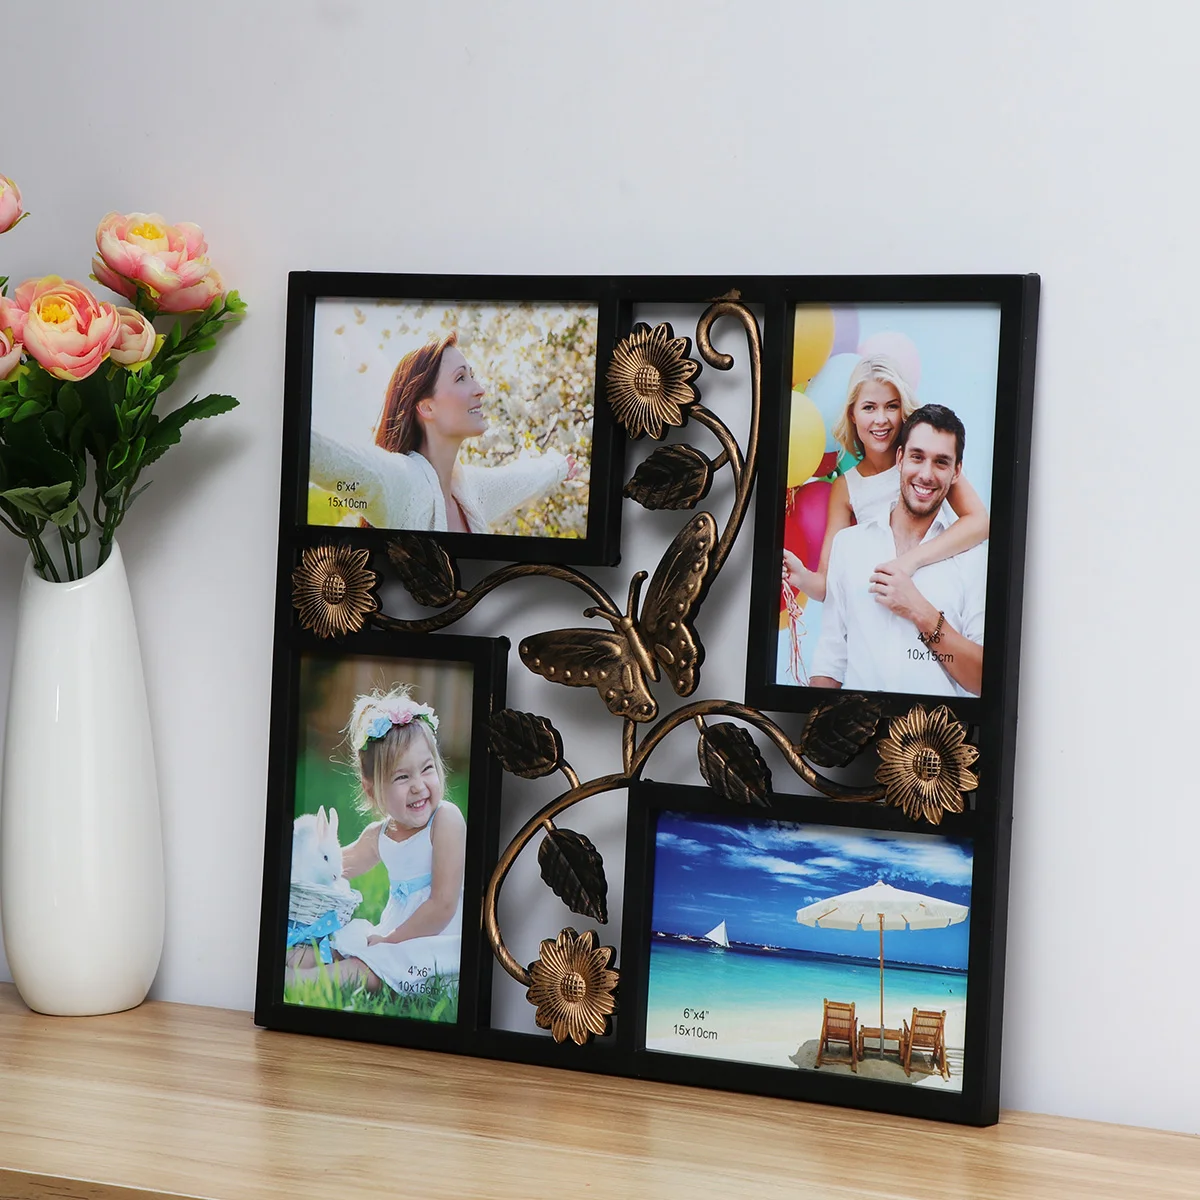 

Photo Collage Frames Wall Picture Frame Decor Ames Family Display Gallery Pictures Lte Ng Ing Letop Ame Deoati Viage U Opg